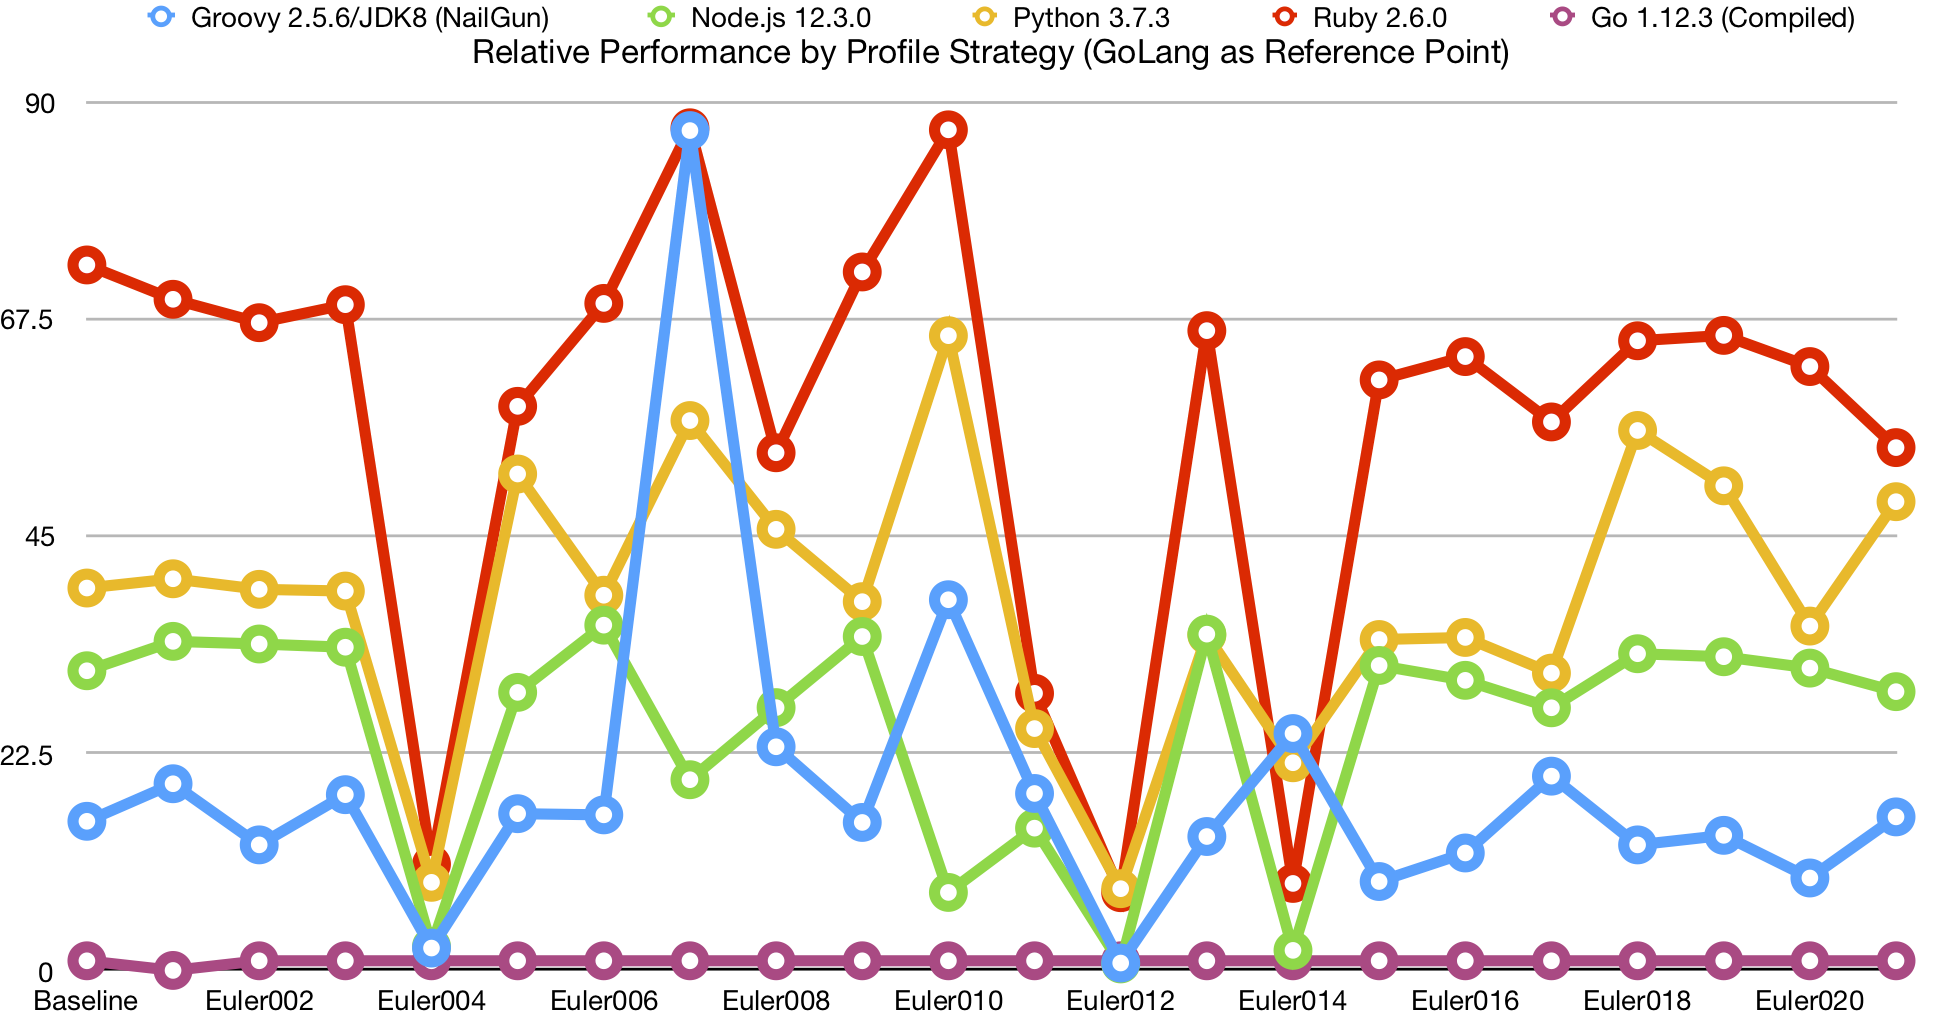 Relative Performance by Profile Strategy (GoLang as Reference Point)